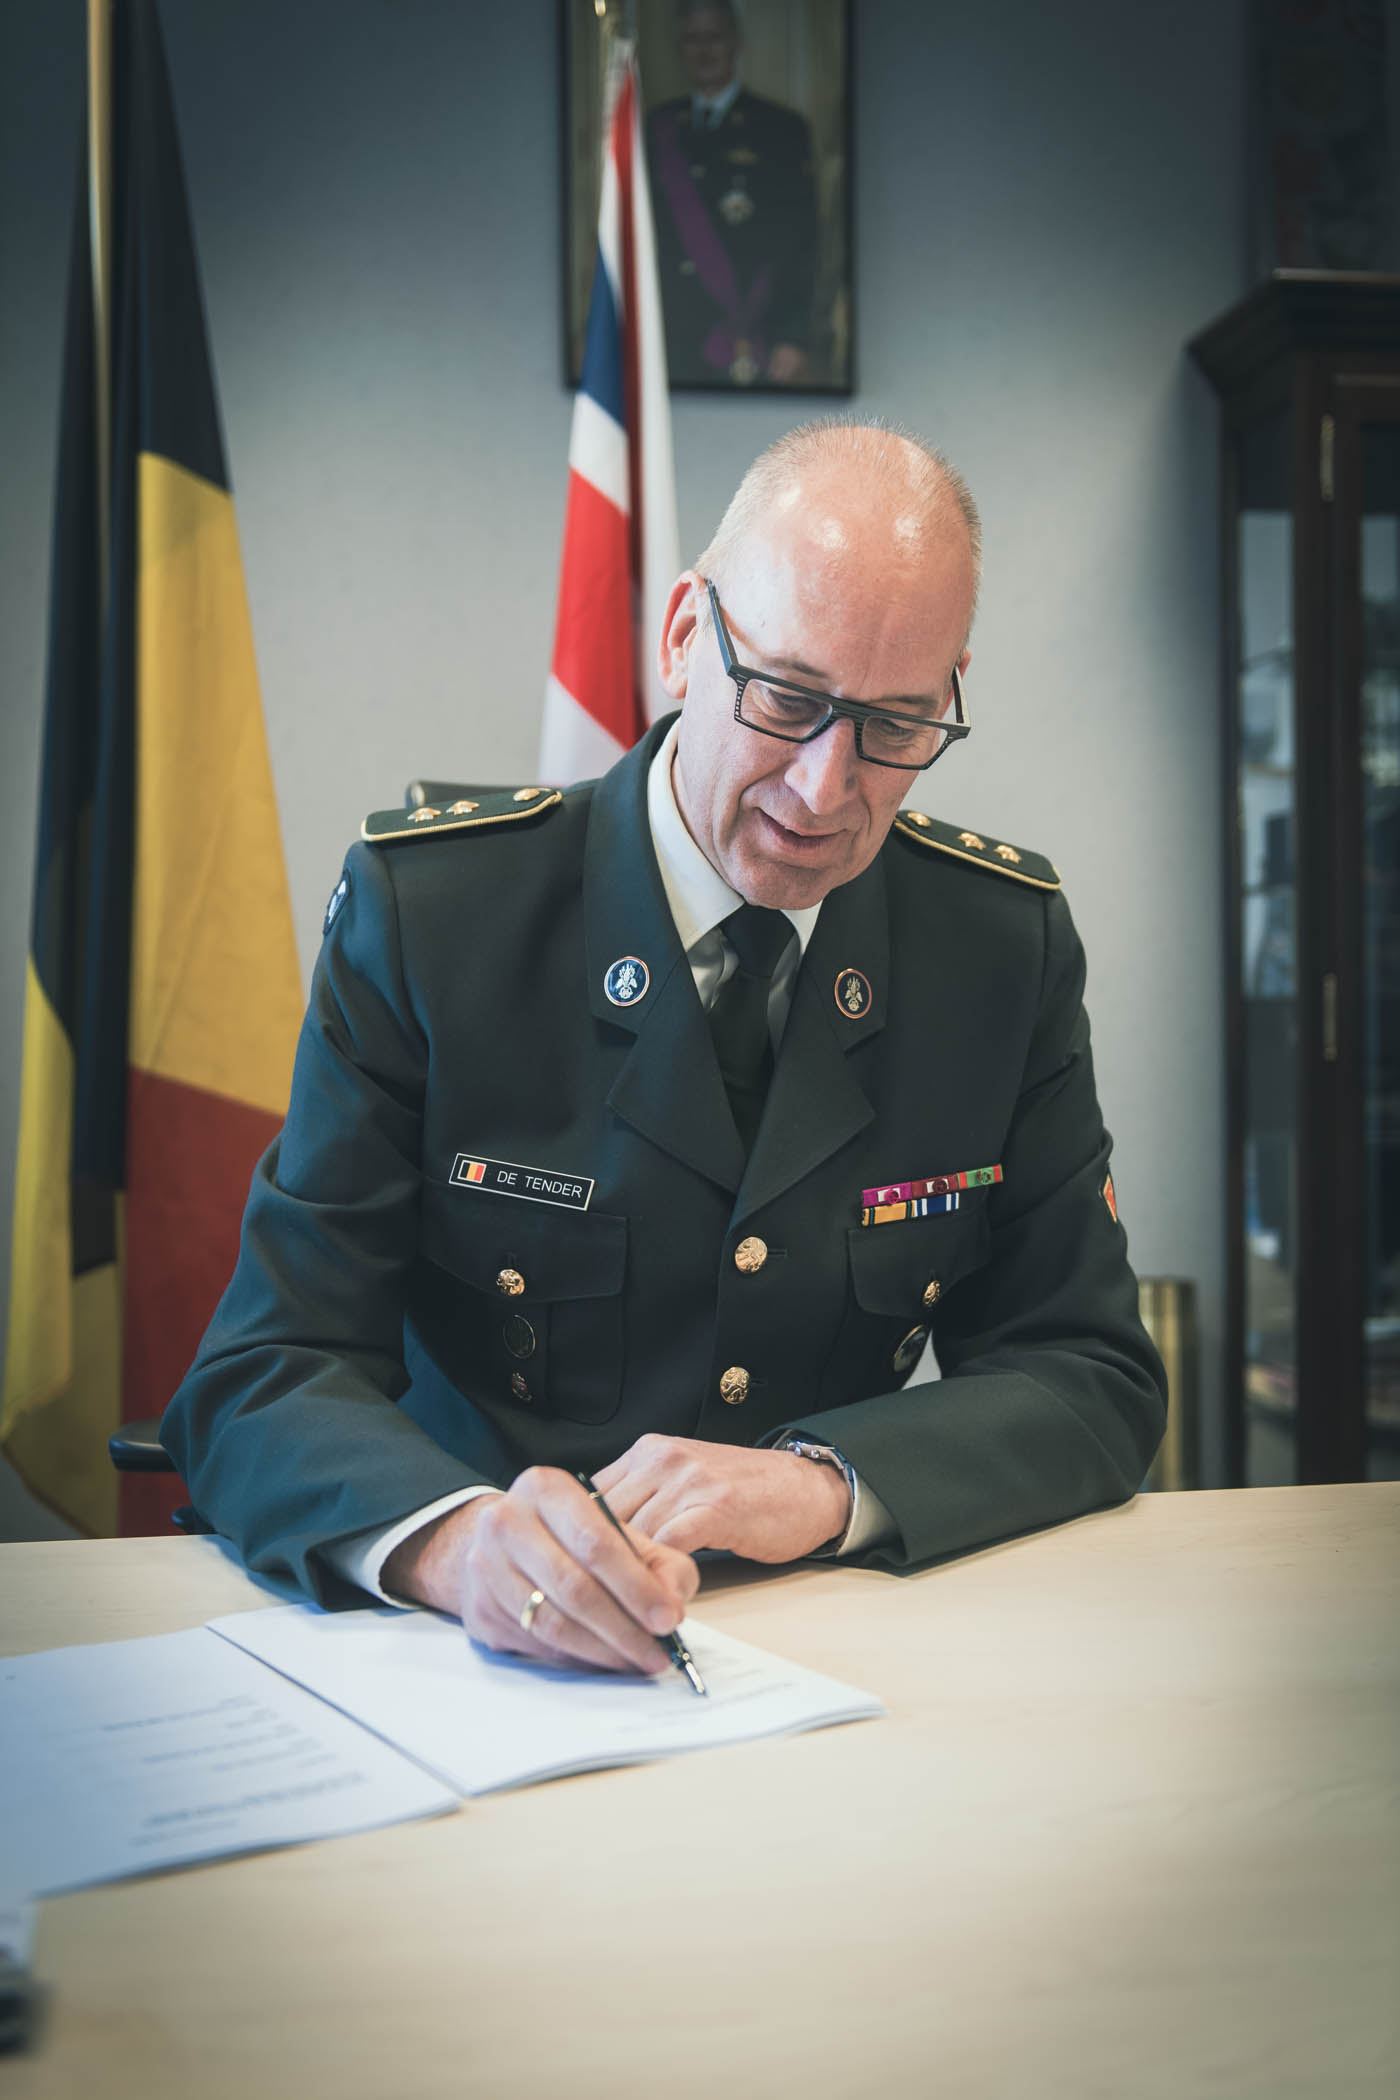 Image shows Belgian Air Force personnel signing agreement.